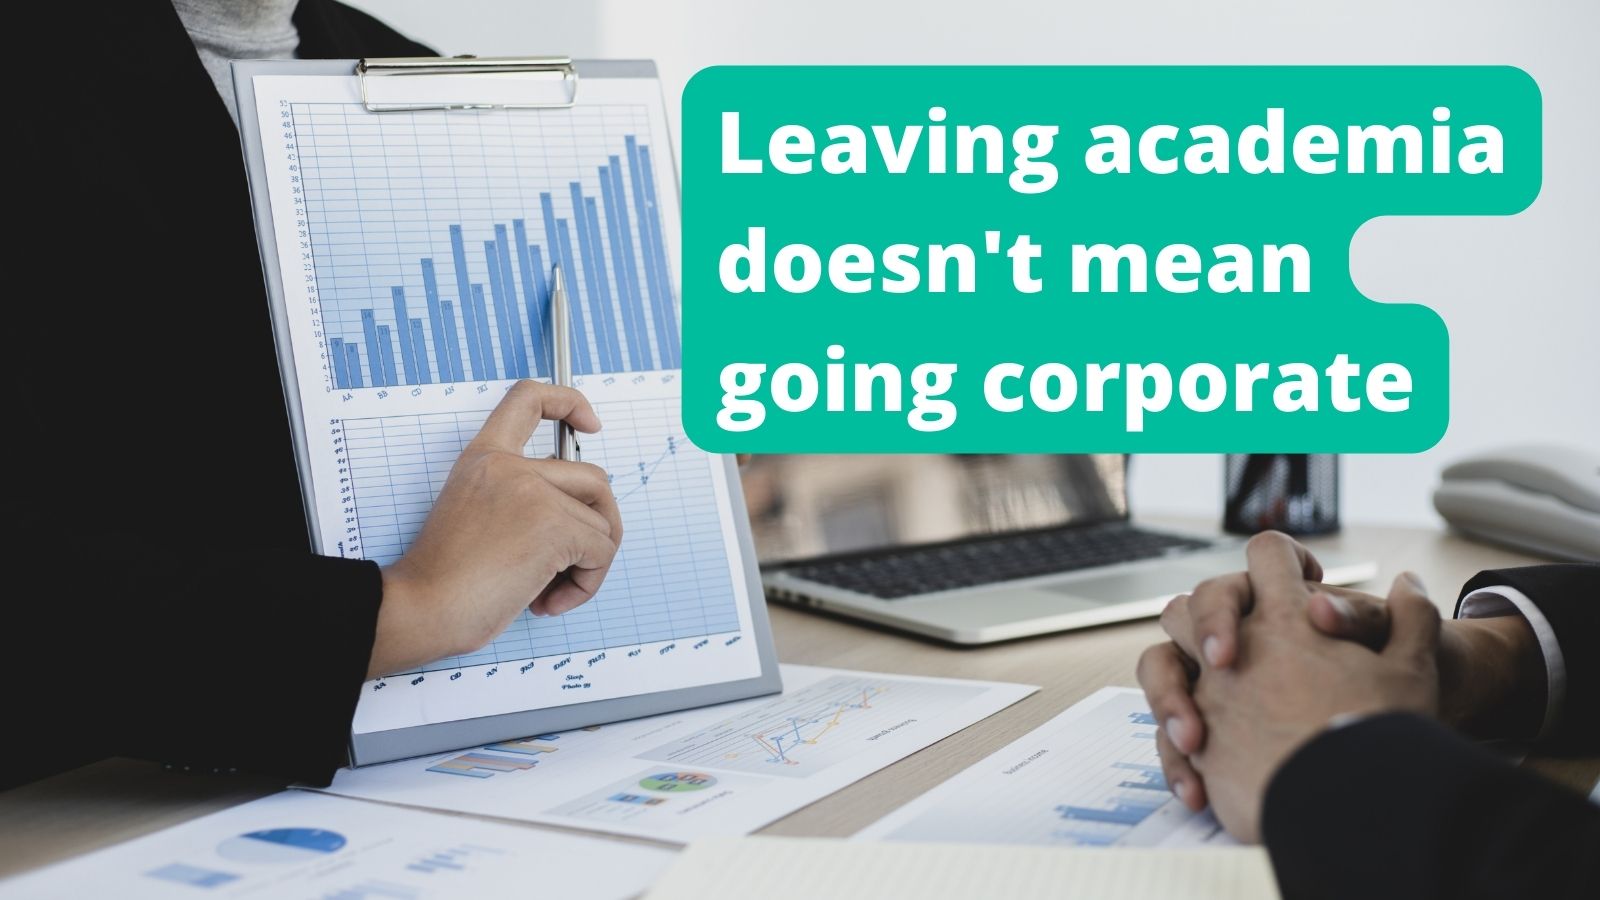 Leaving academia doesn’t mean going corporate